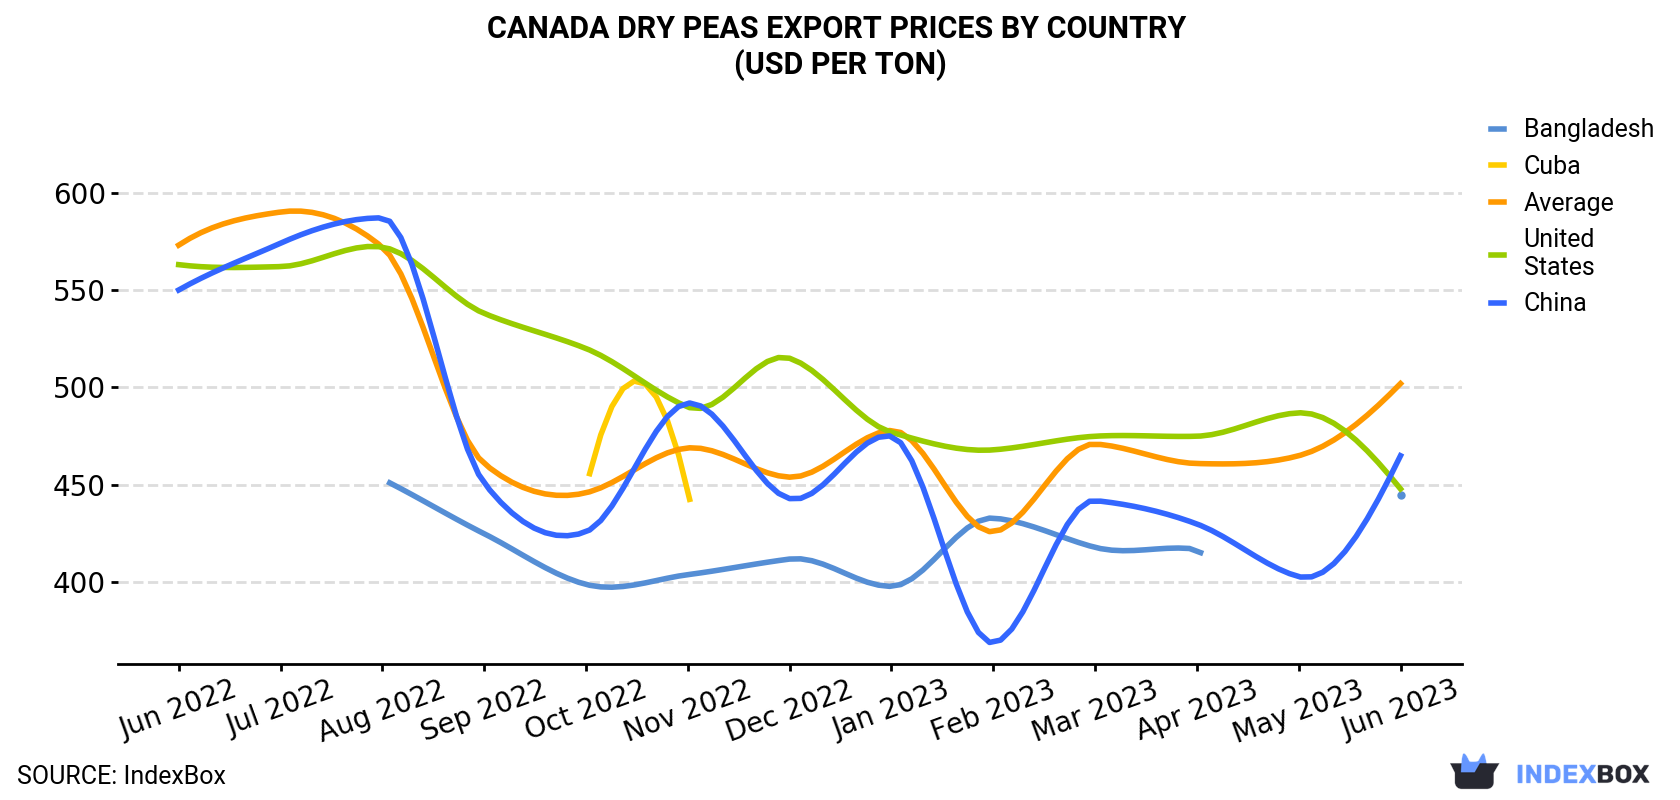 Canada Dry Peas Export Prices By Country (USD Per Ton)